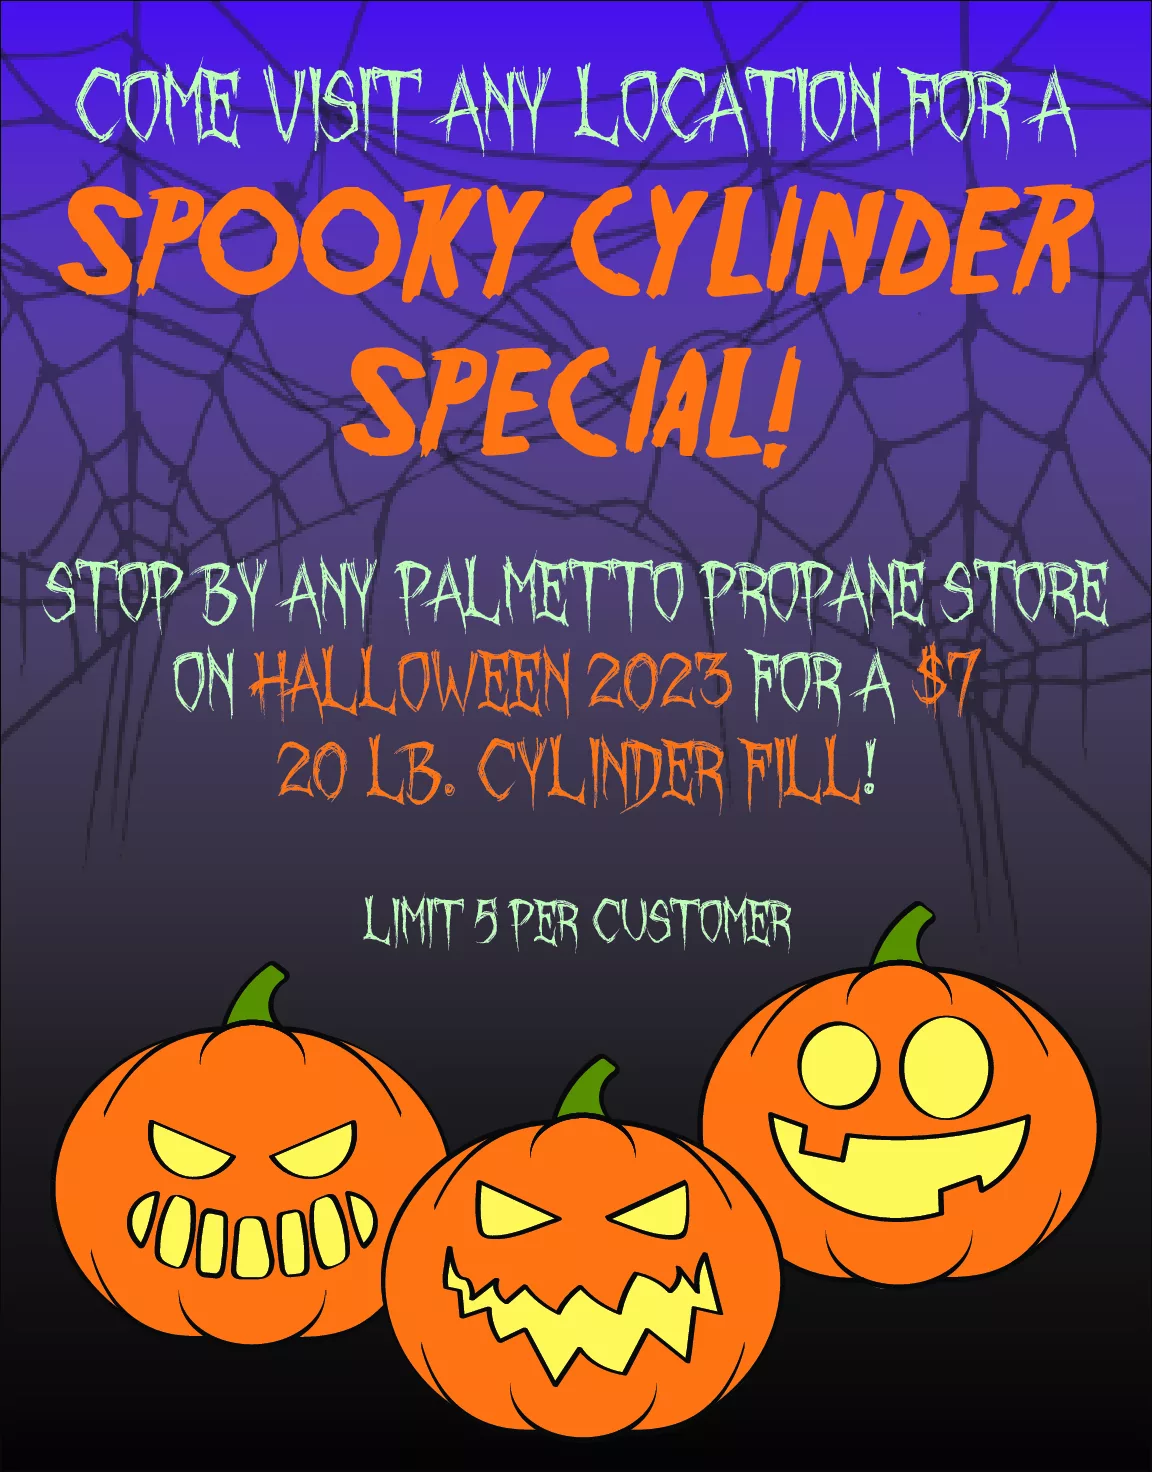 Spooky Cylinder Special